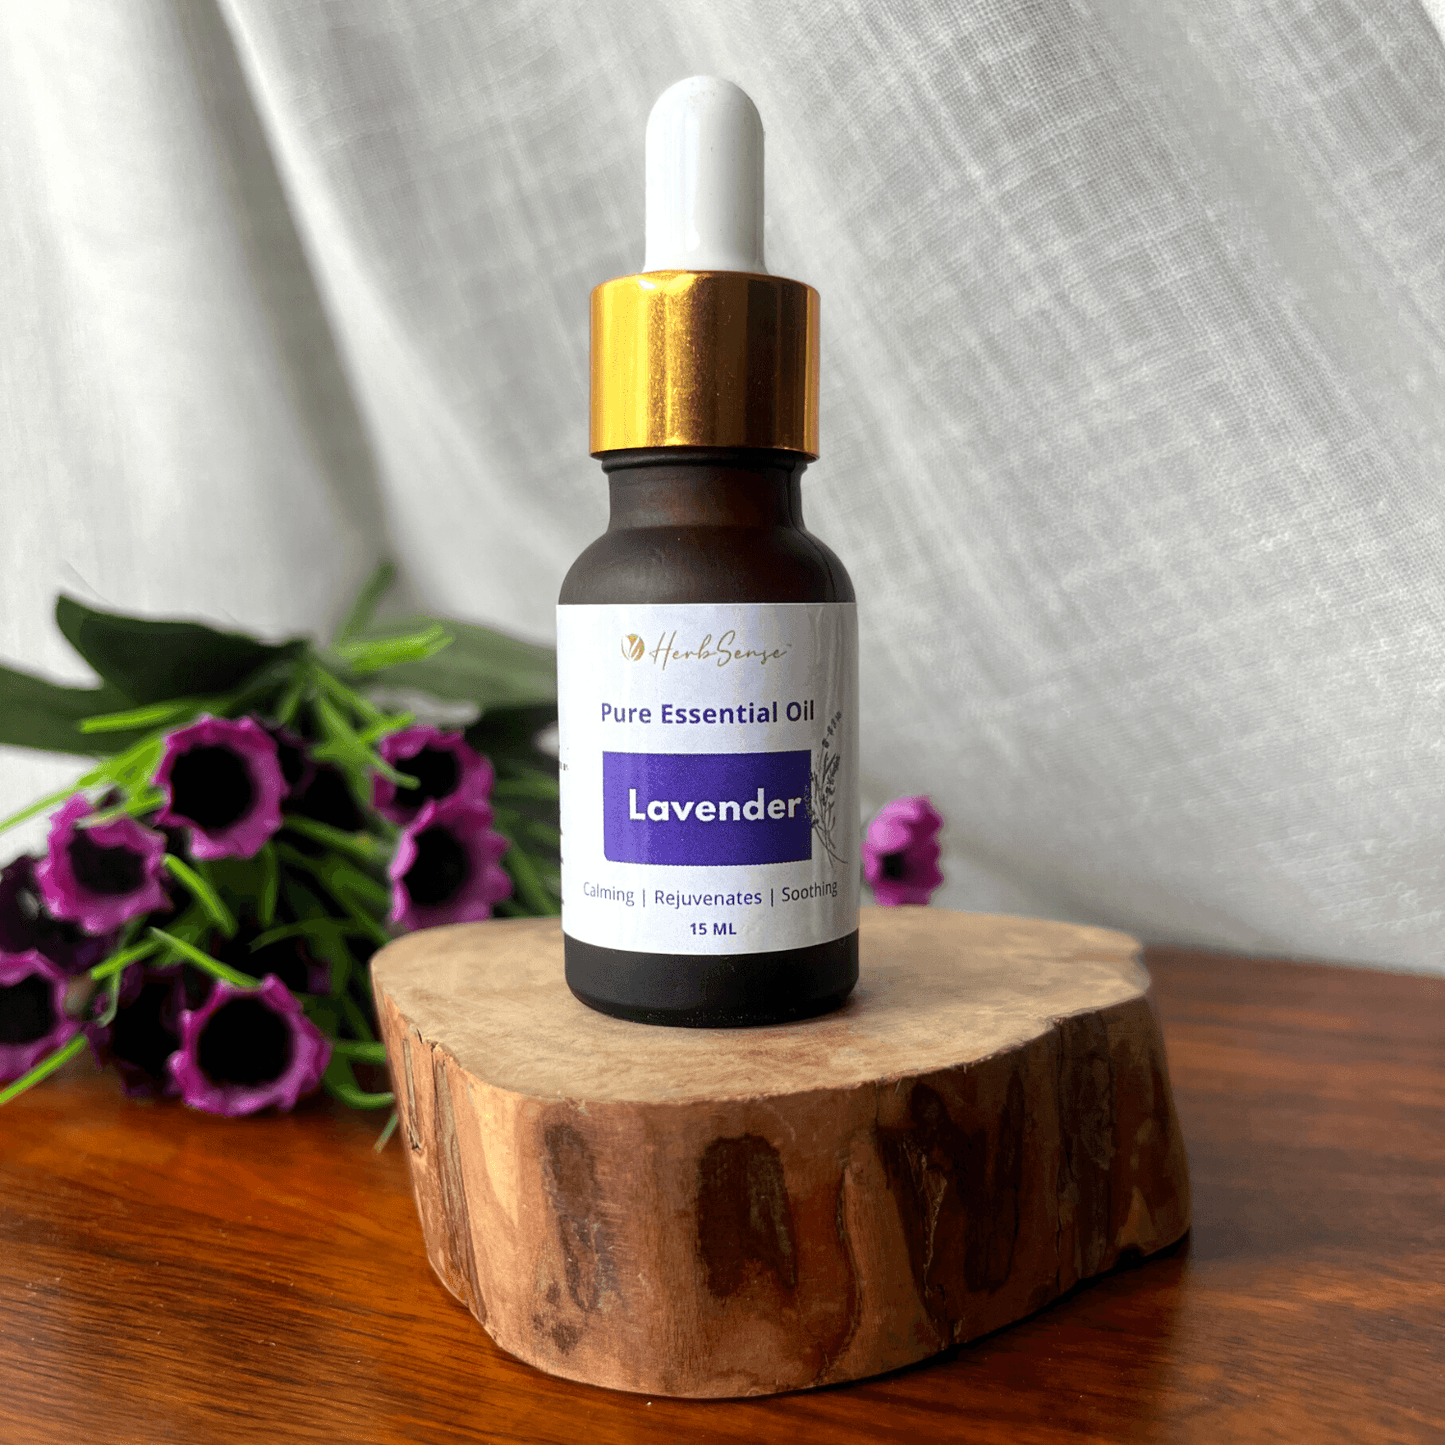 Lavender Essential Oil for Healthy Hair, Skin, Sleep - 100% Pure, Natural and Undiluted 15ML - Herbsense